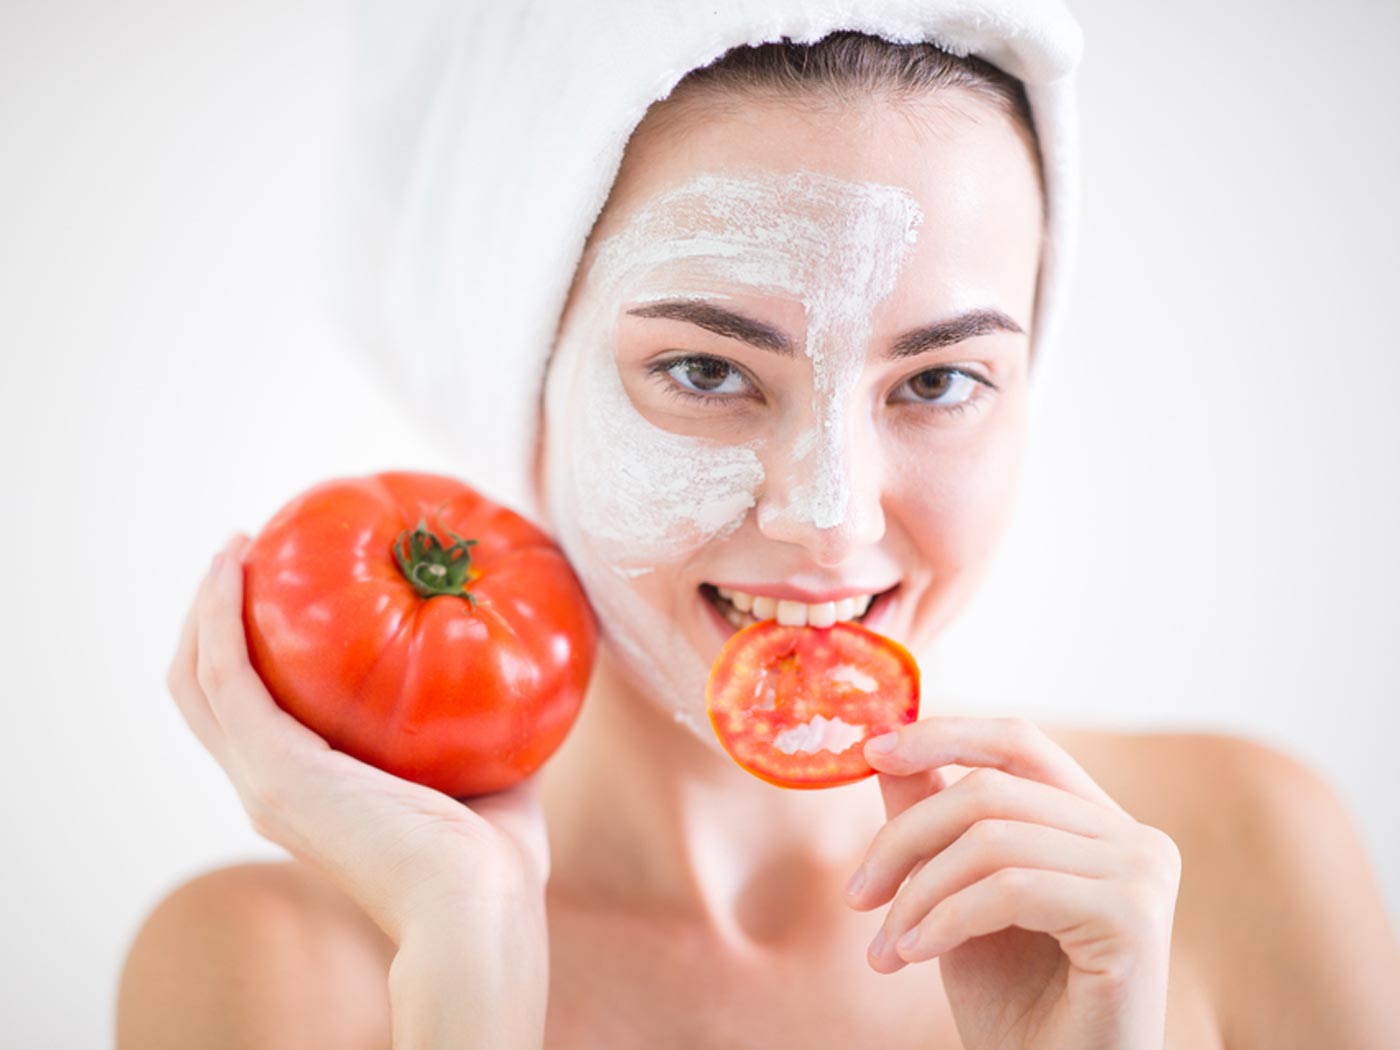 5 Skincare Foods You Should Try To Flaunt Healthy, Glowing Skin